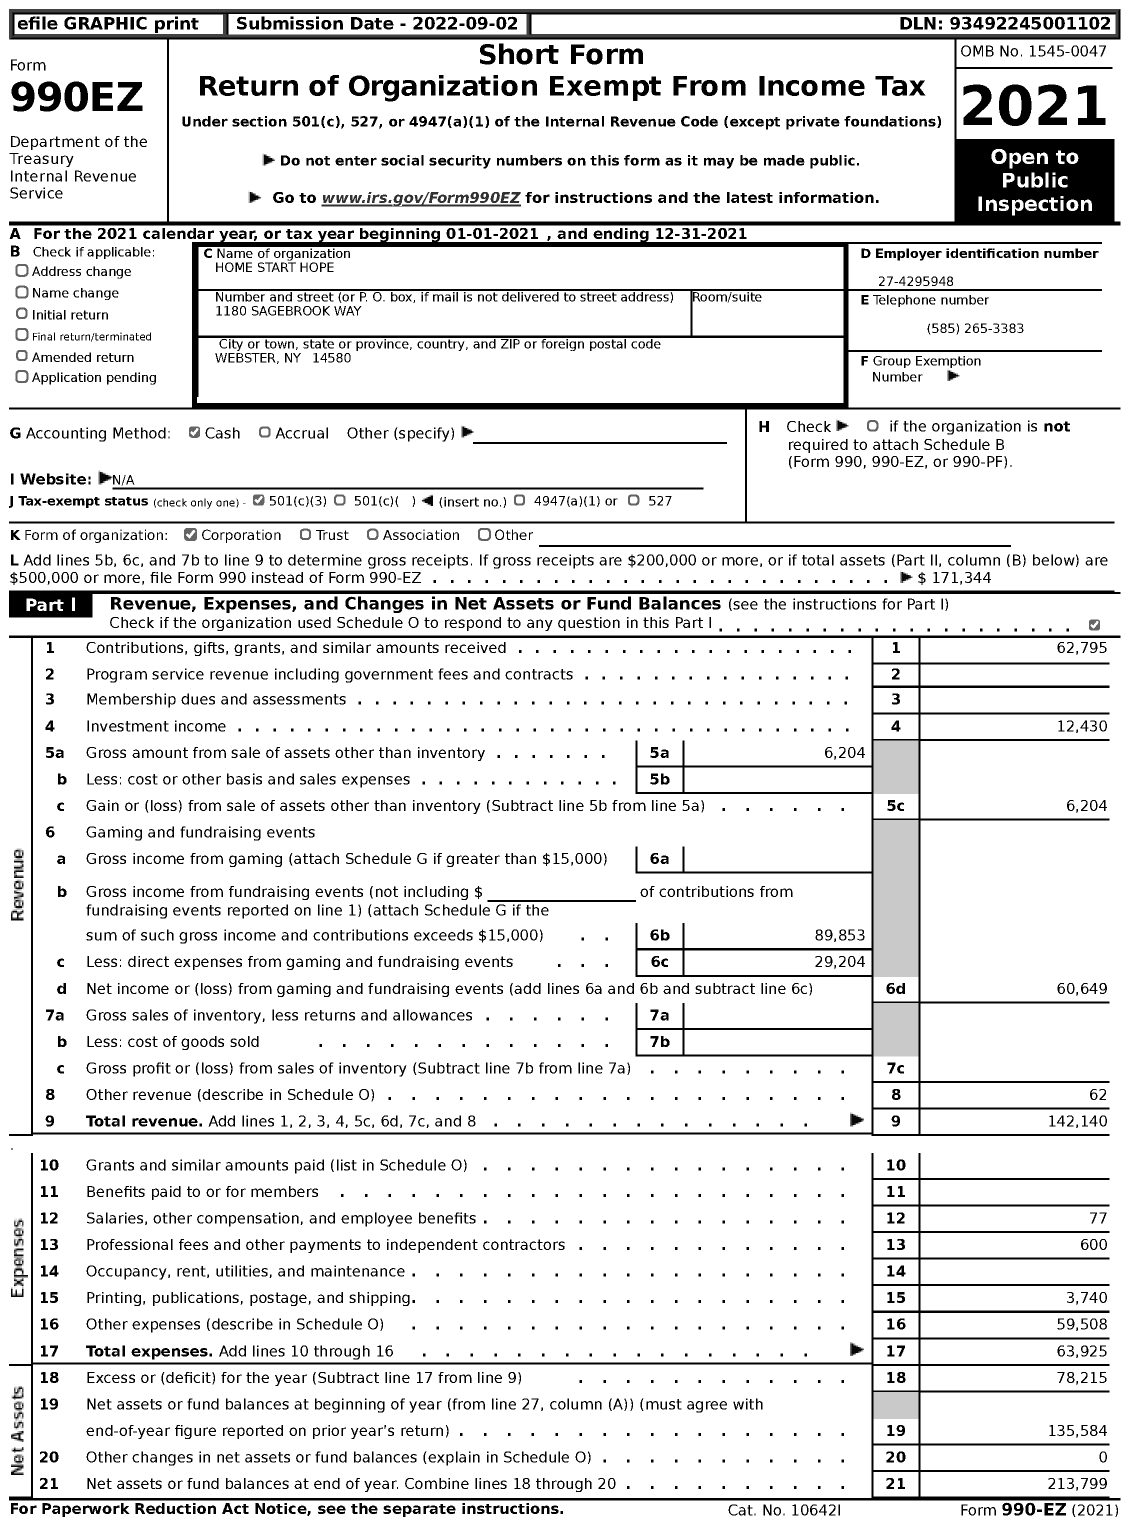 Image of first page of 2021 Form 990EZ for Home Start Hope